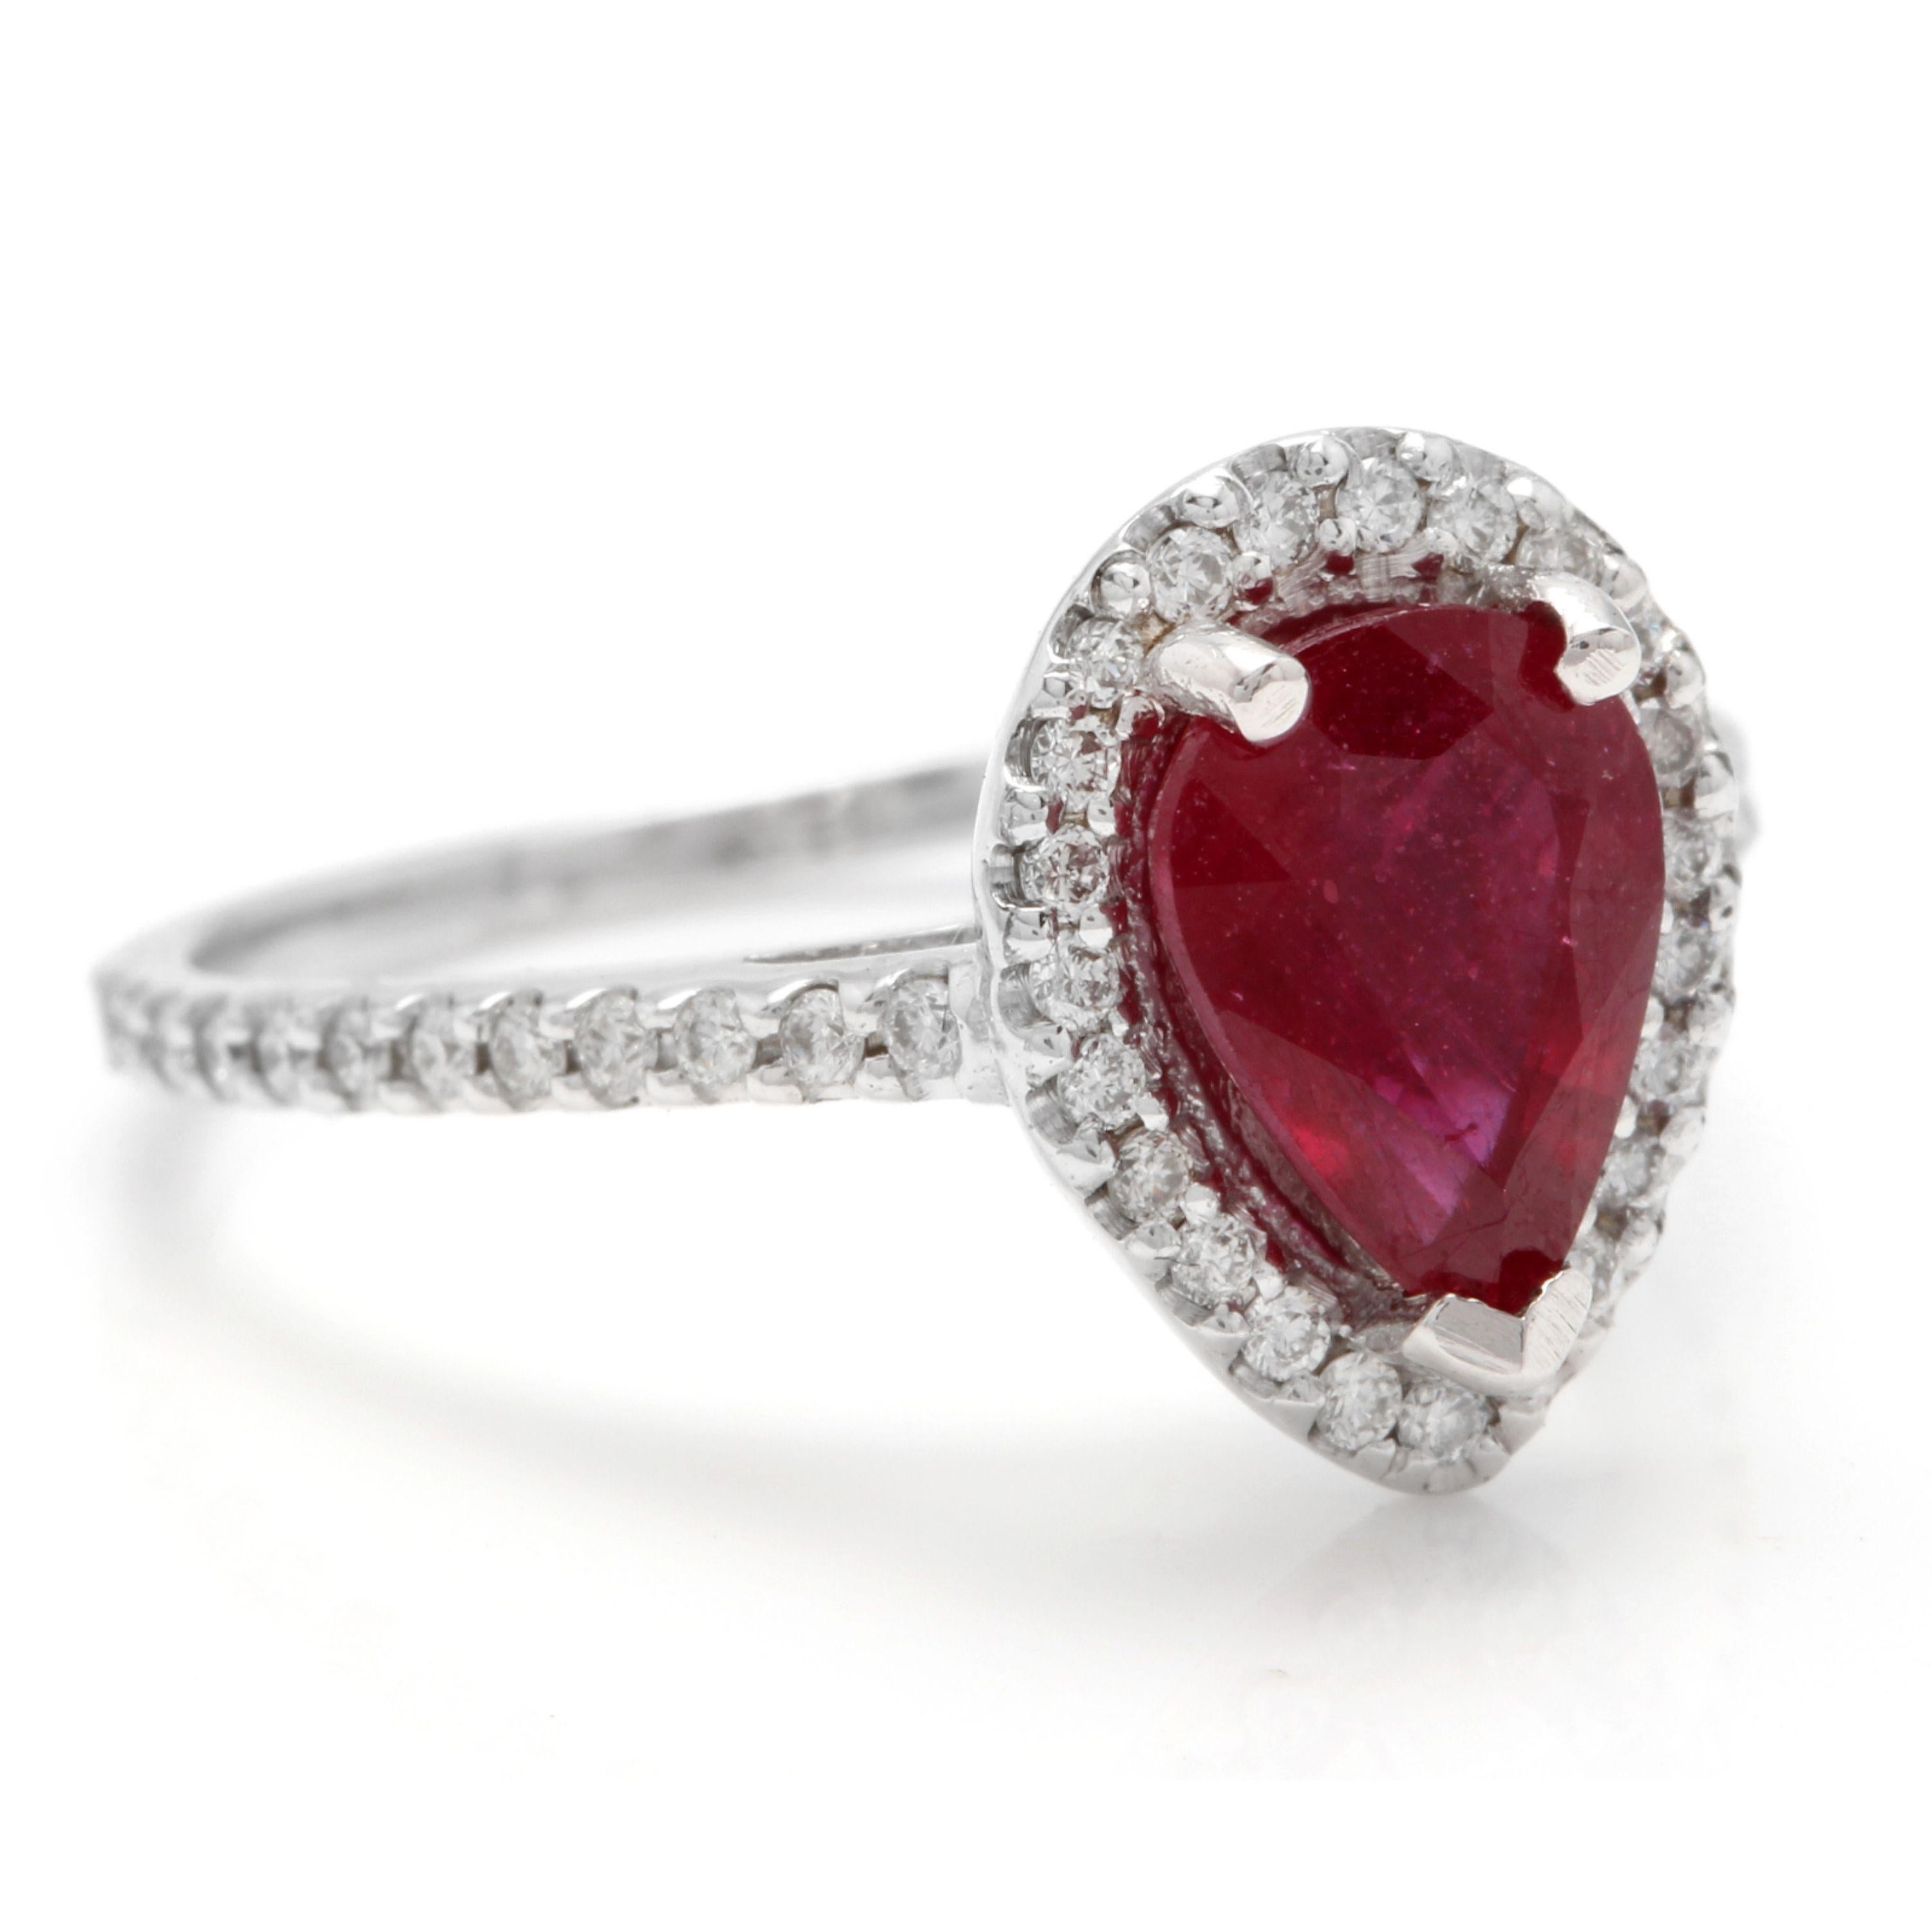 1.80 Carats Impressive Red Ruby and Natural Diamond 14K White Gold Ring

Total Red Ruby Weight is: Approx. 1.50 Carats

Ruby Treatment: Lead Glass Filling

Ruby Measures: Approx. 8.00 x 6.00mm

Natural Round Diamonds Weight: Approx. 0.30 Carats